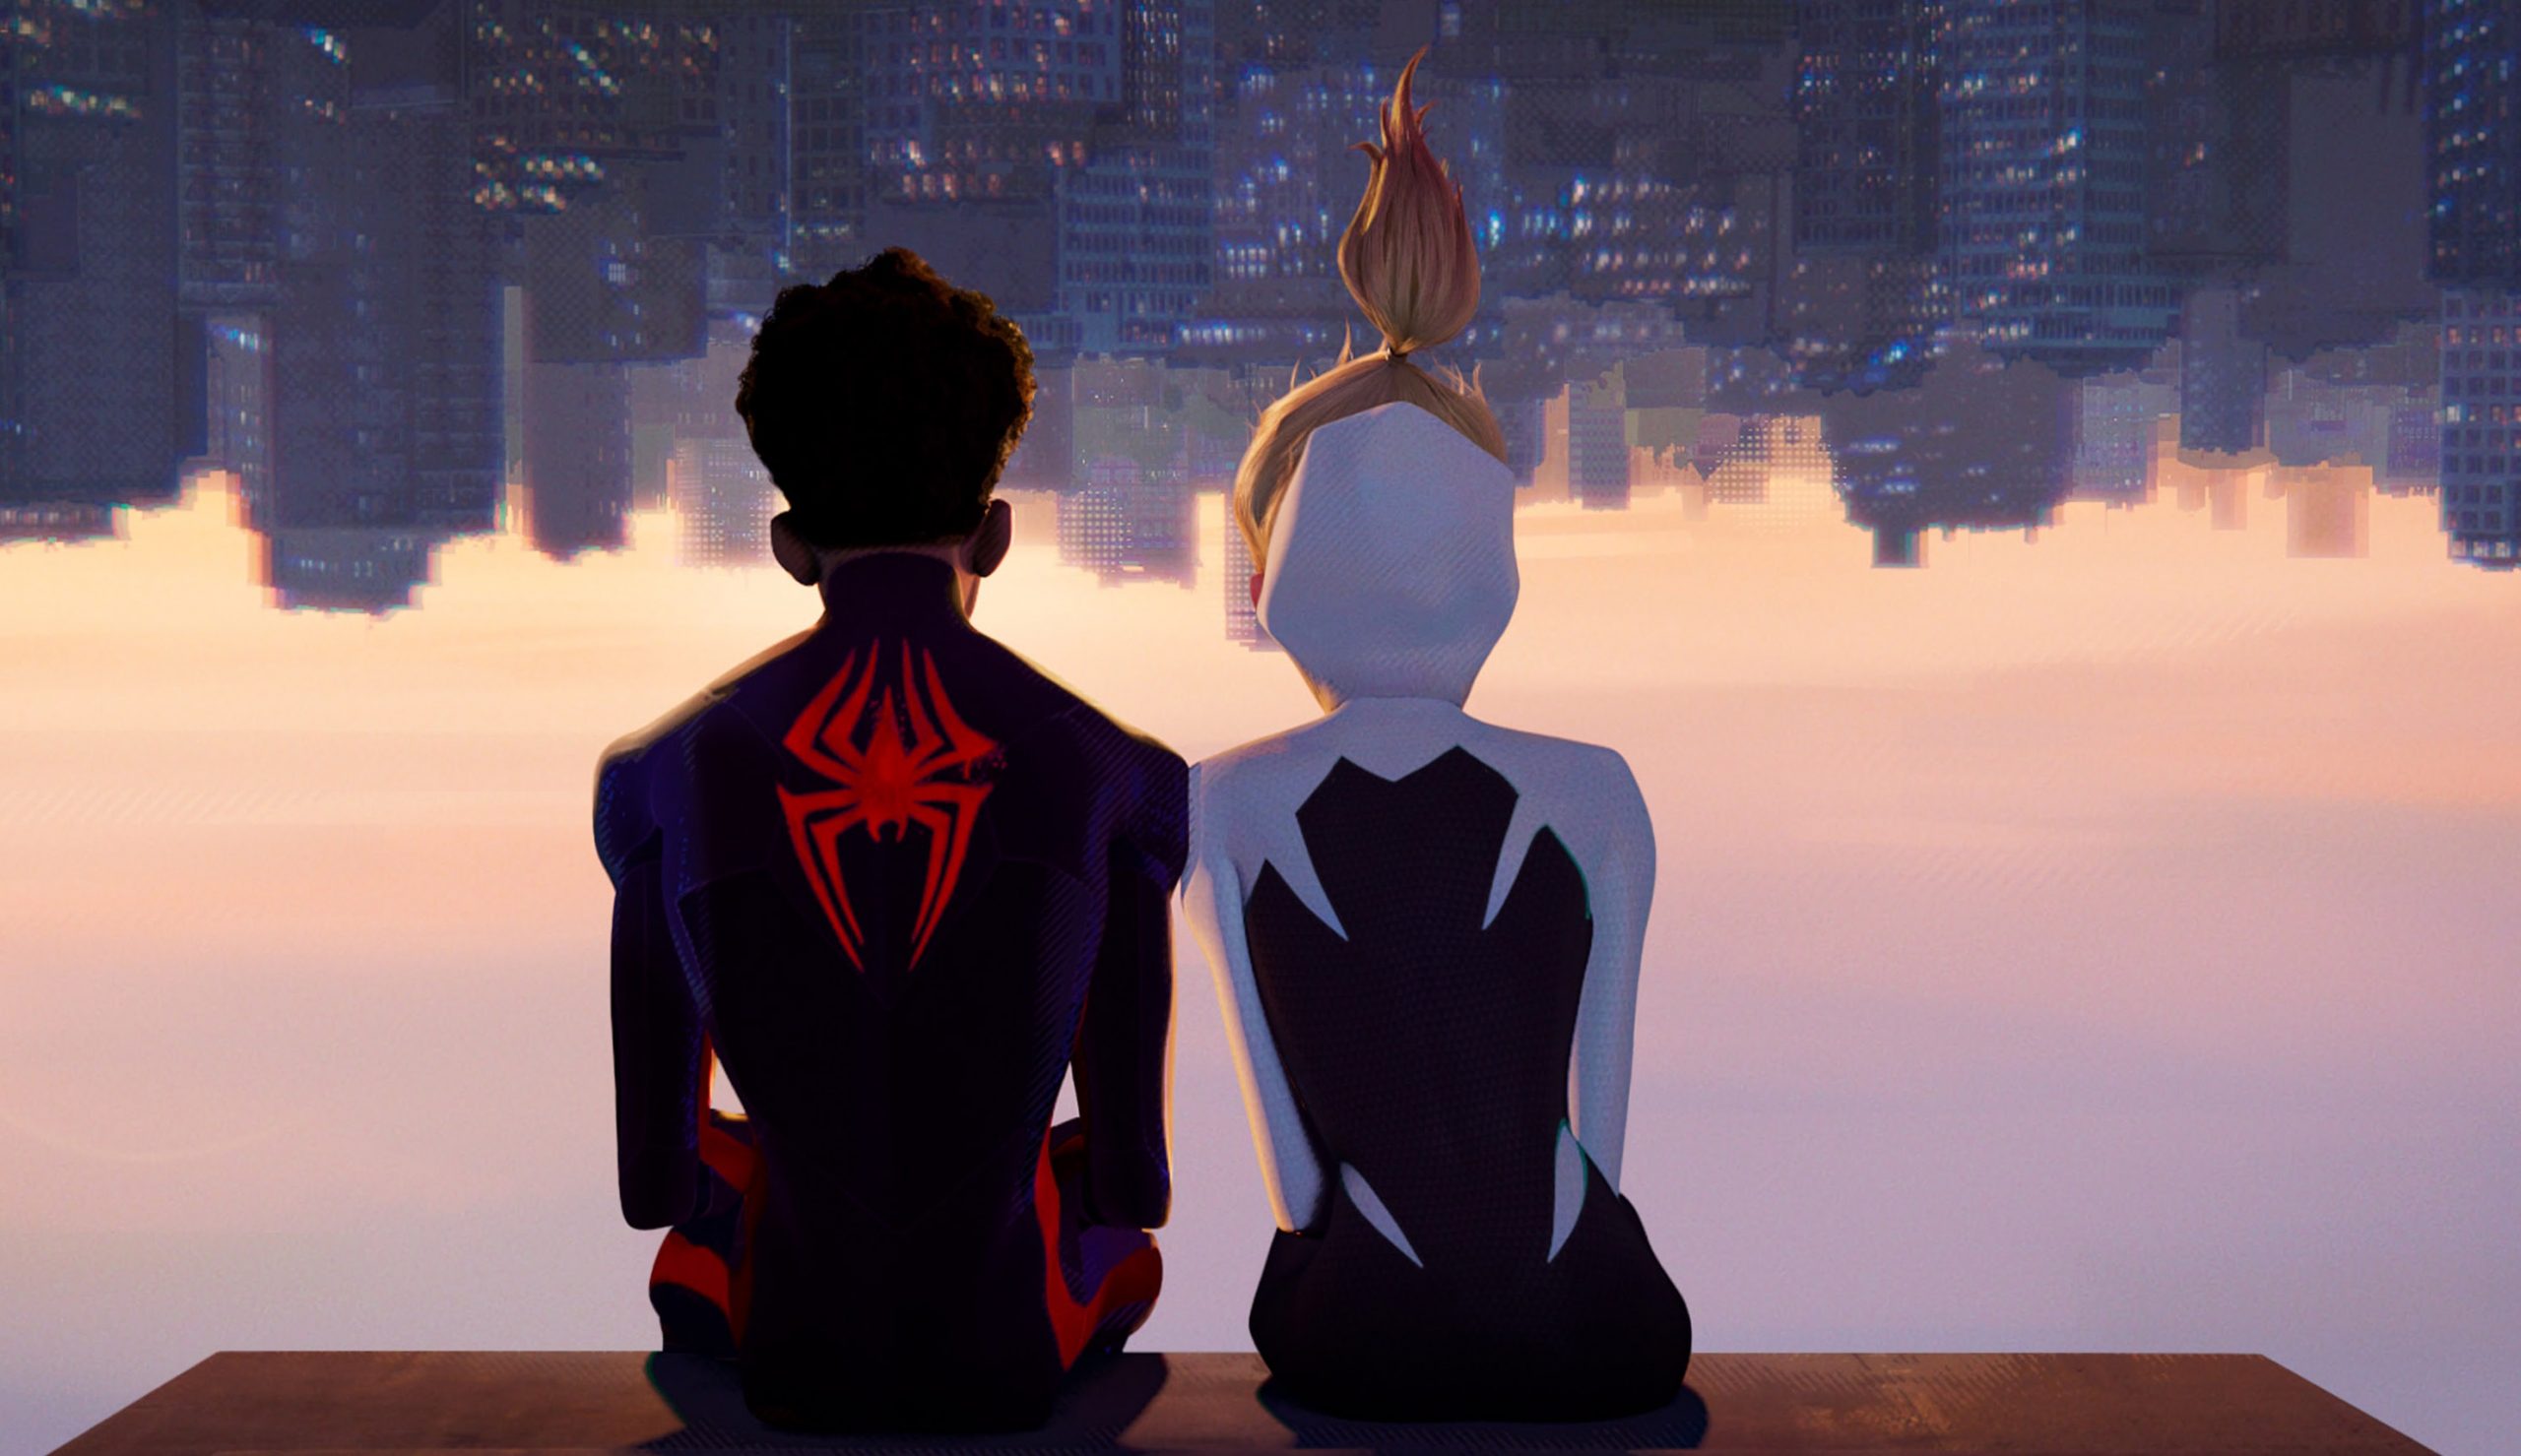 Miles Morales and Gwen sitting side by side on a dock looking out over an upside down New York.